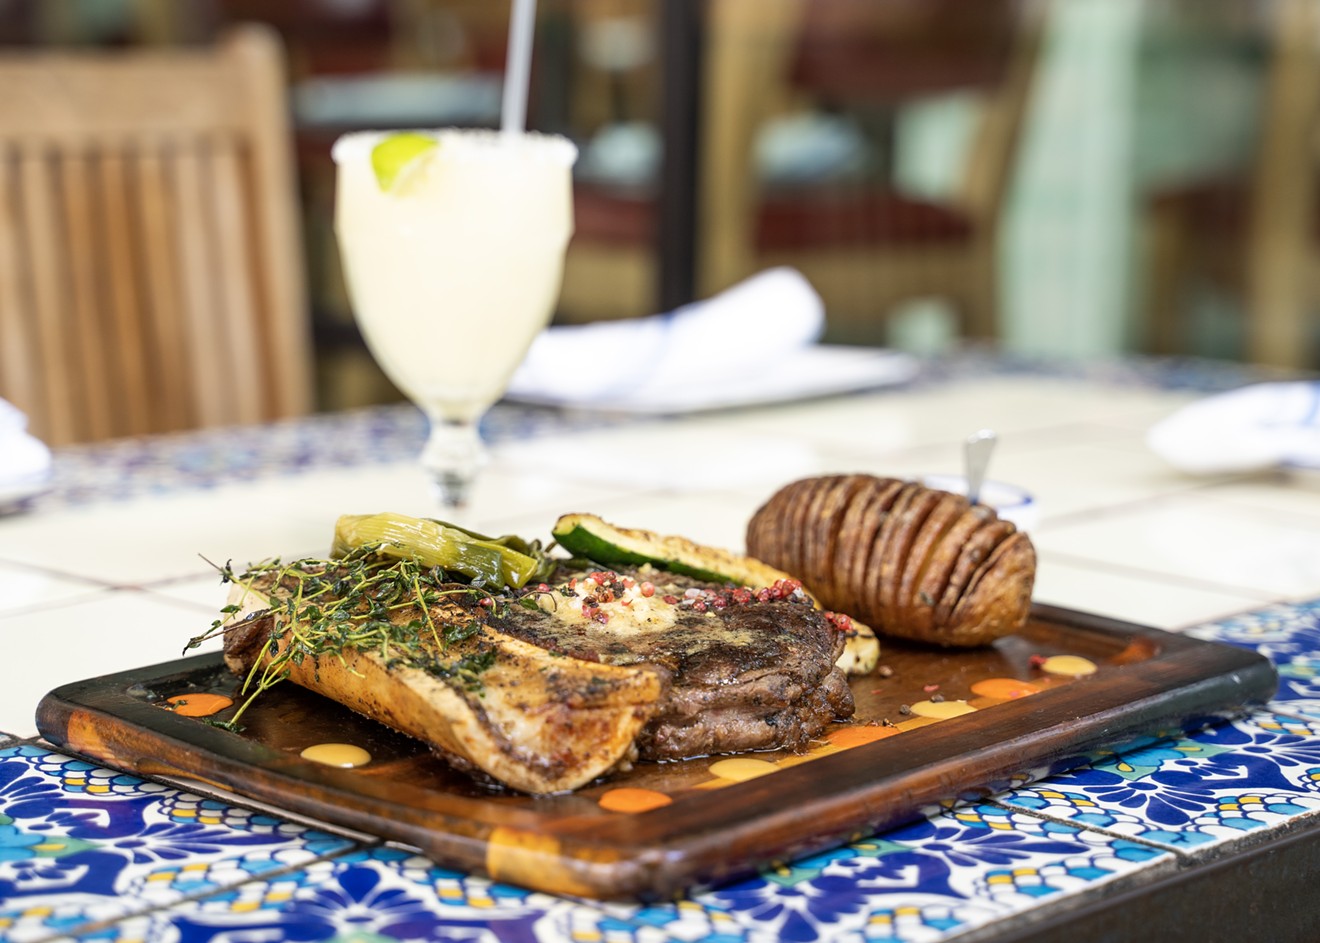 The Original Ninfa's got ribeye and whiskey in its Father's Day plans.